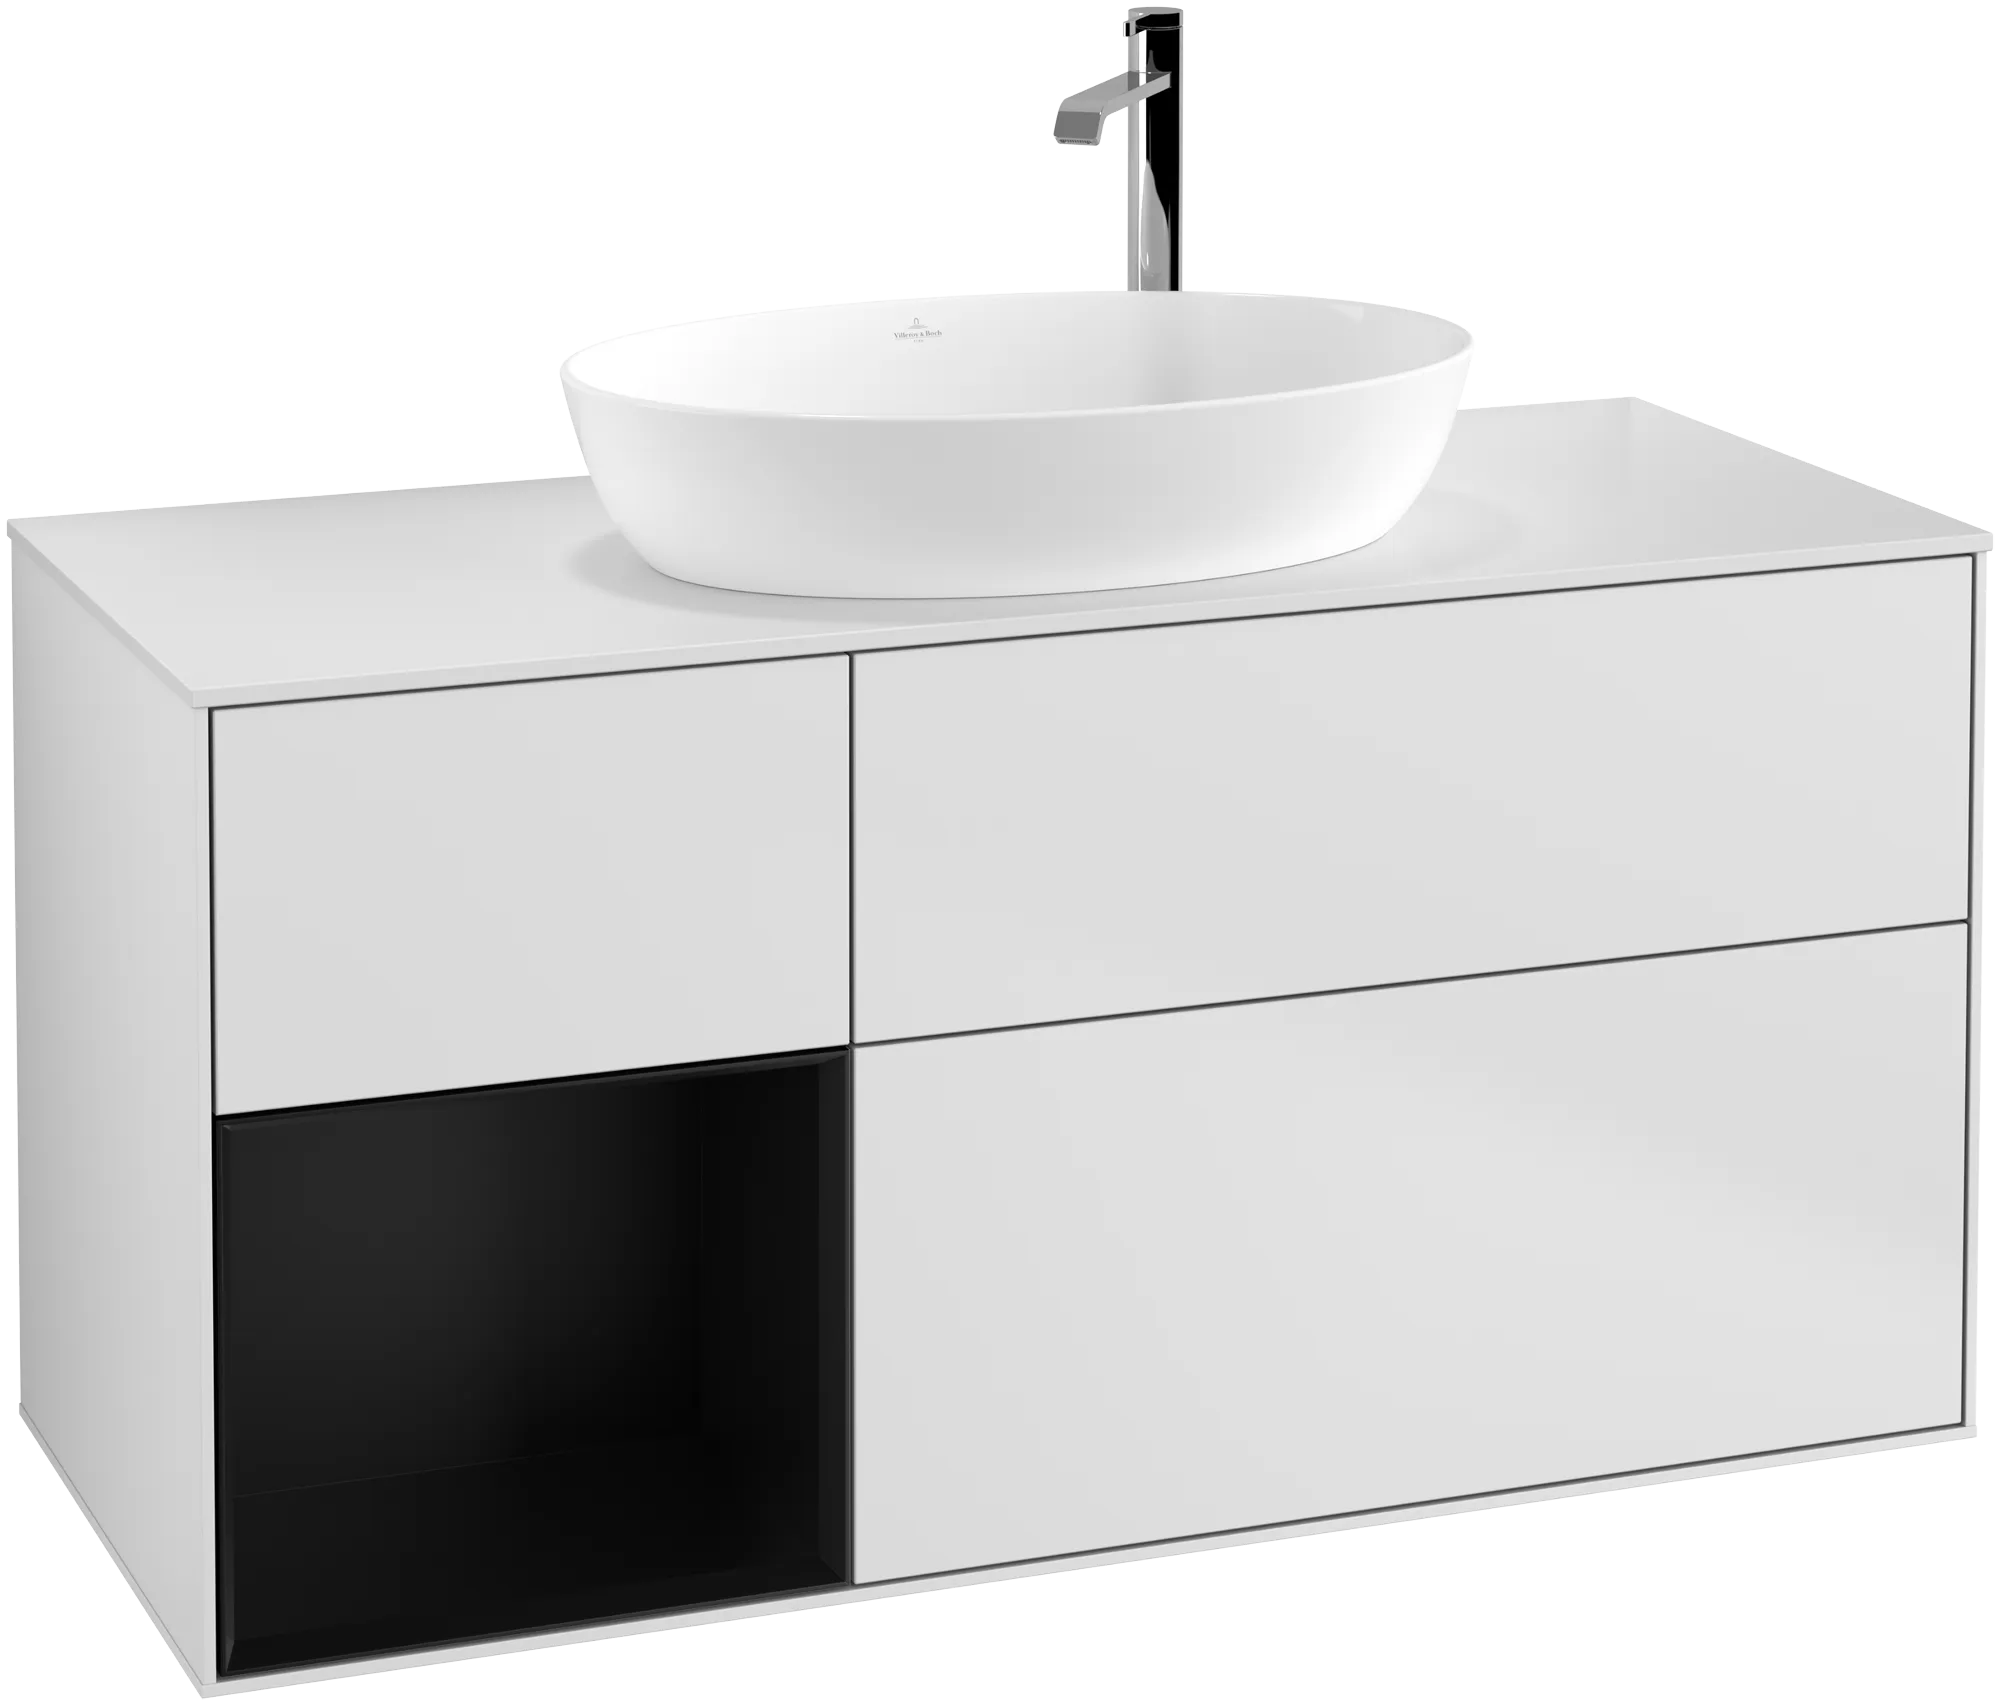 VILLEROY BOCH Finion Vanity unit, with lighting, 3 pull-out compartments, 1200 x 603 x 501 mm, White Matt Lacquer / Black Matt Lacquer / Glass White Matt #G941PDMT resmi